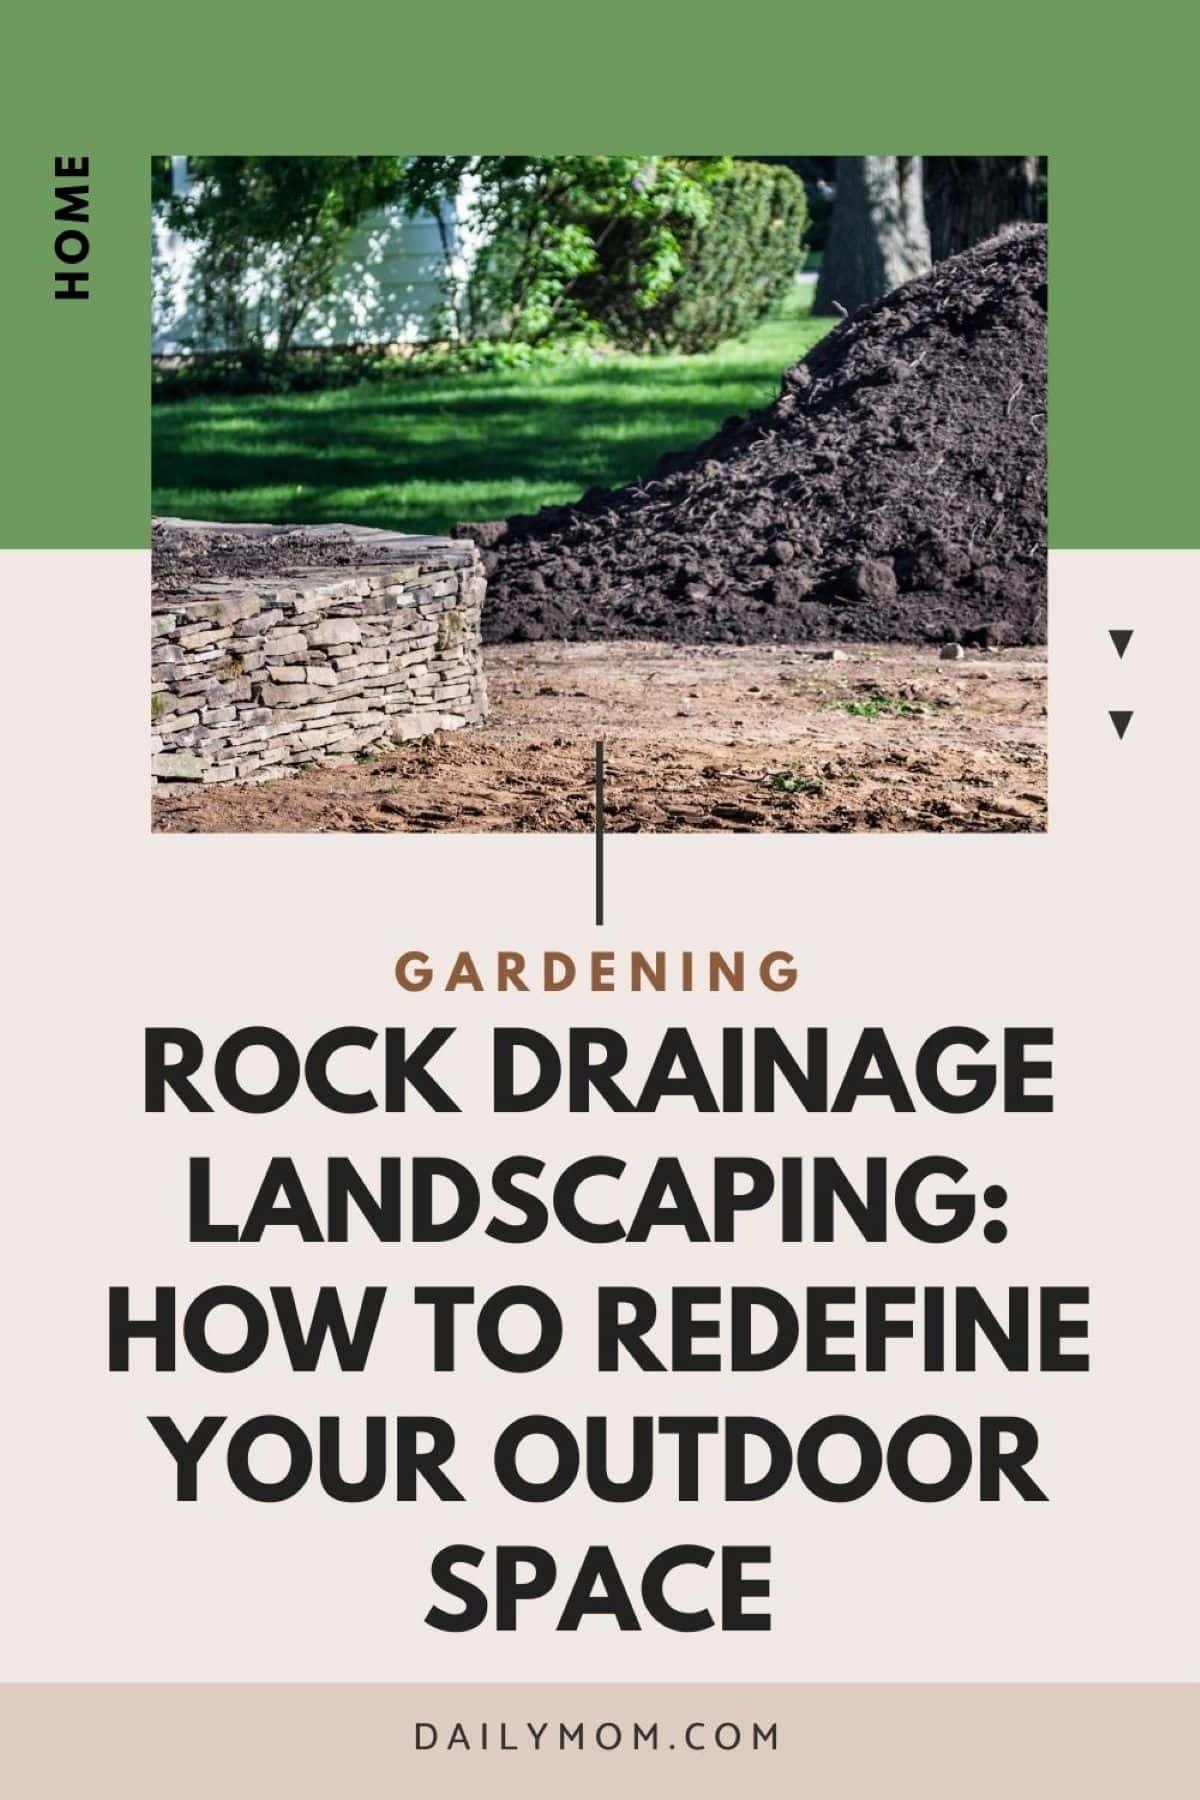 Rock Drainage Landscaping: Redefine Your Landscape For The Better With These 6 Essential Transformation Tips 7 Daily Mom, Magazine For Families